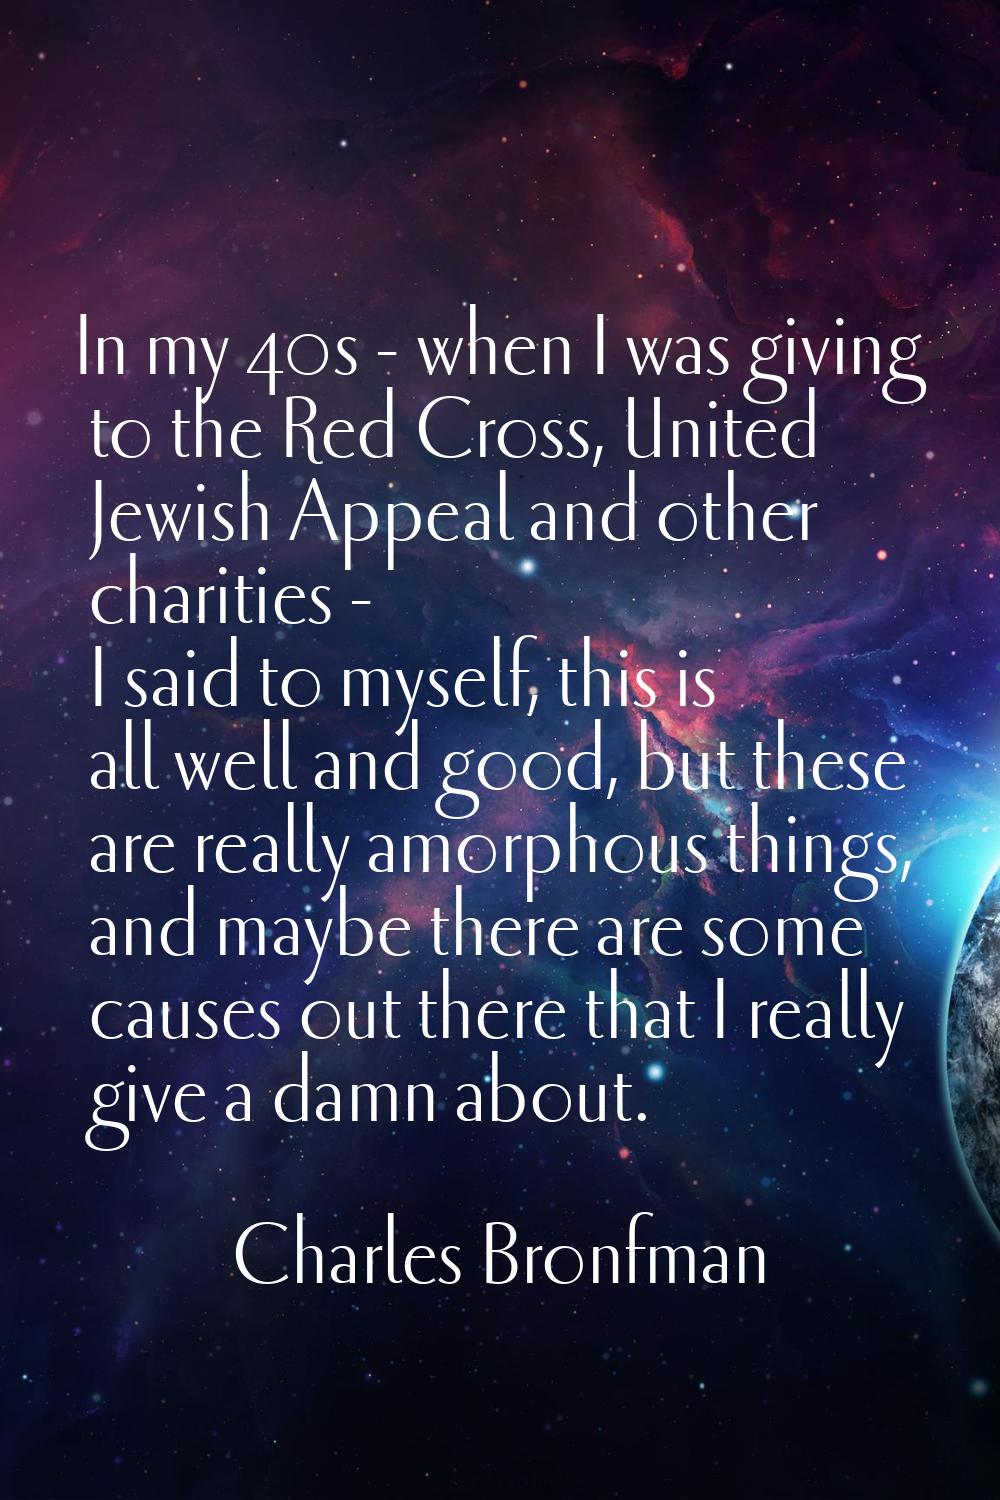 In my 40s - when I was giving to the Red Cross, United Jewish Appeal and other charities - I said t